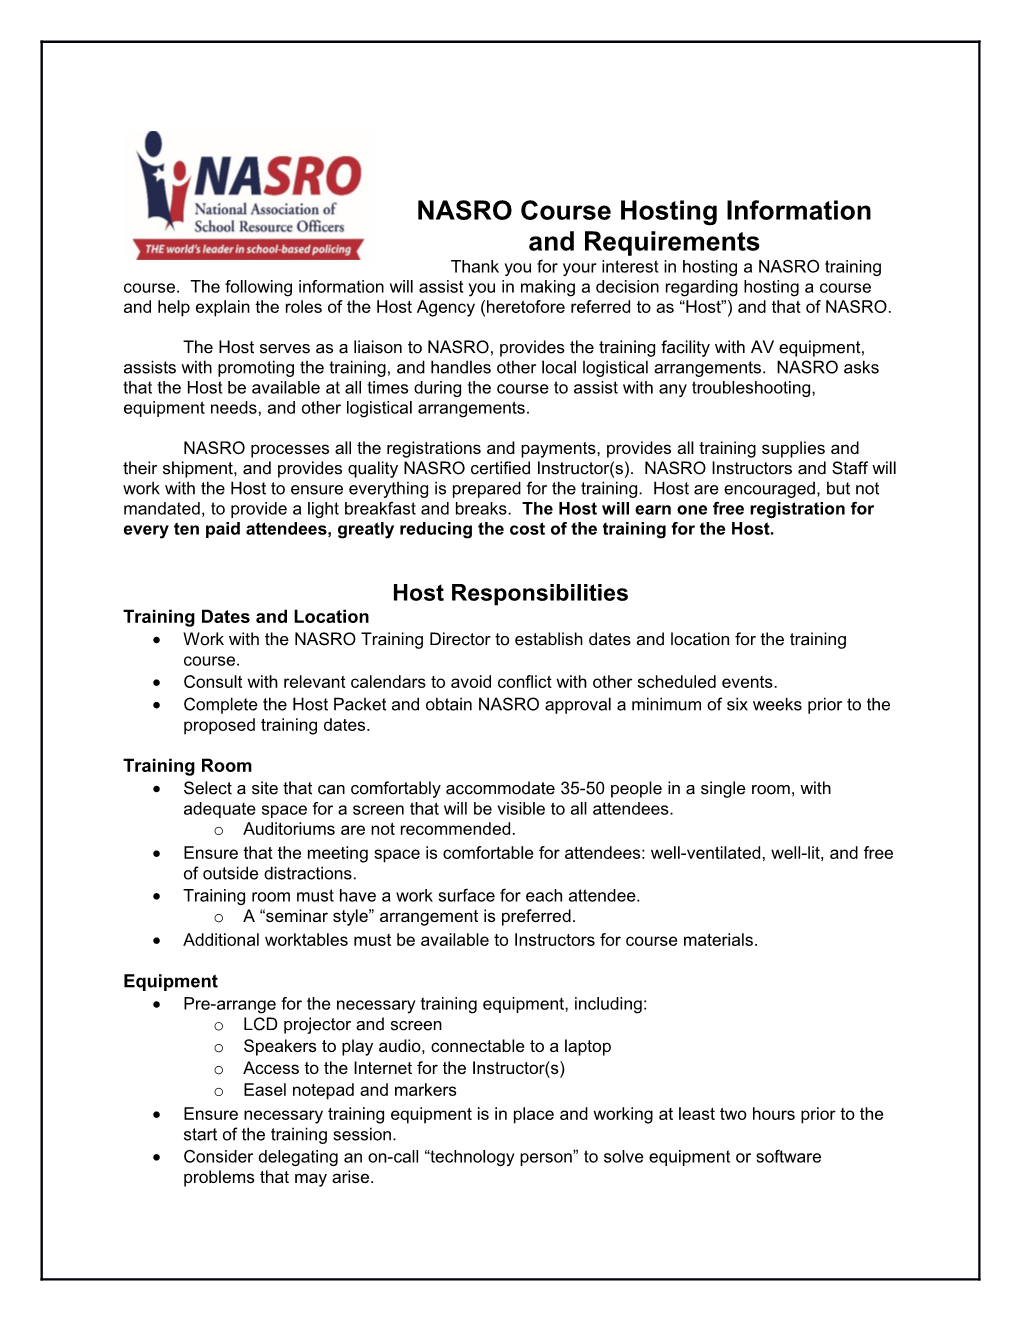 NASRO Course Hosting Information and Requirements